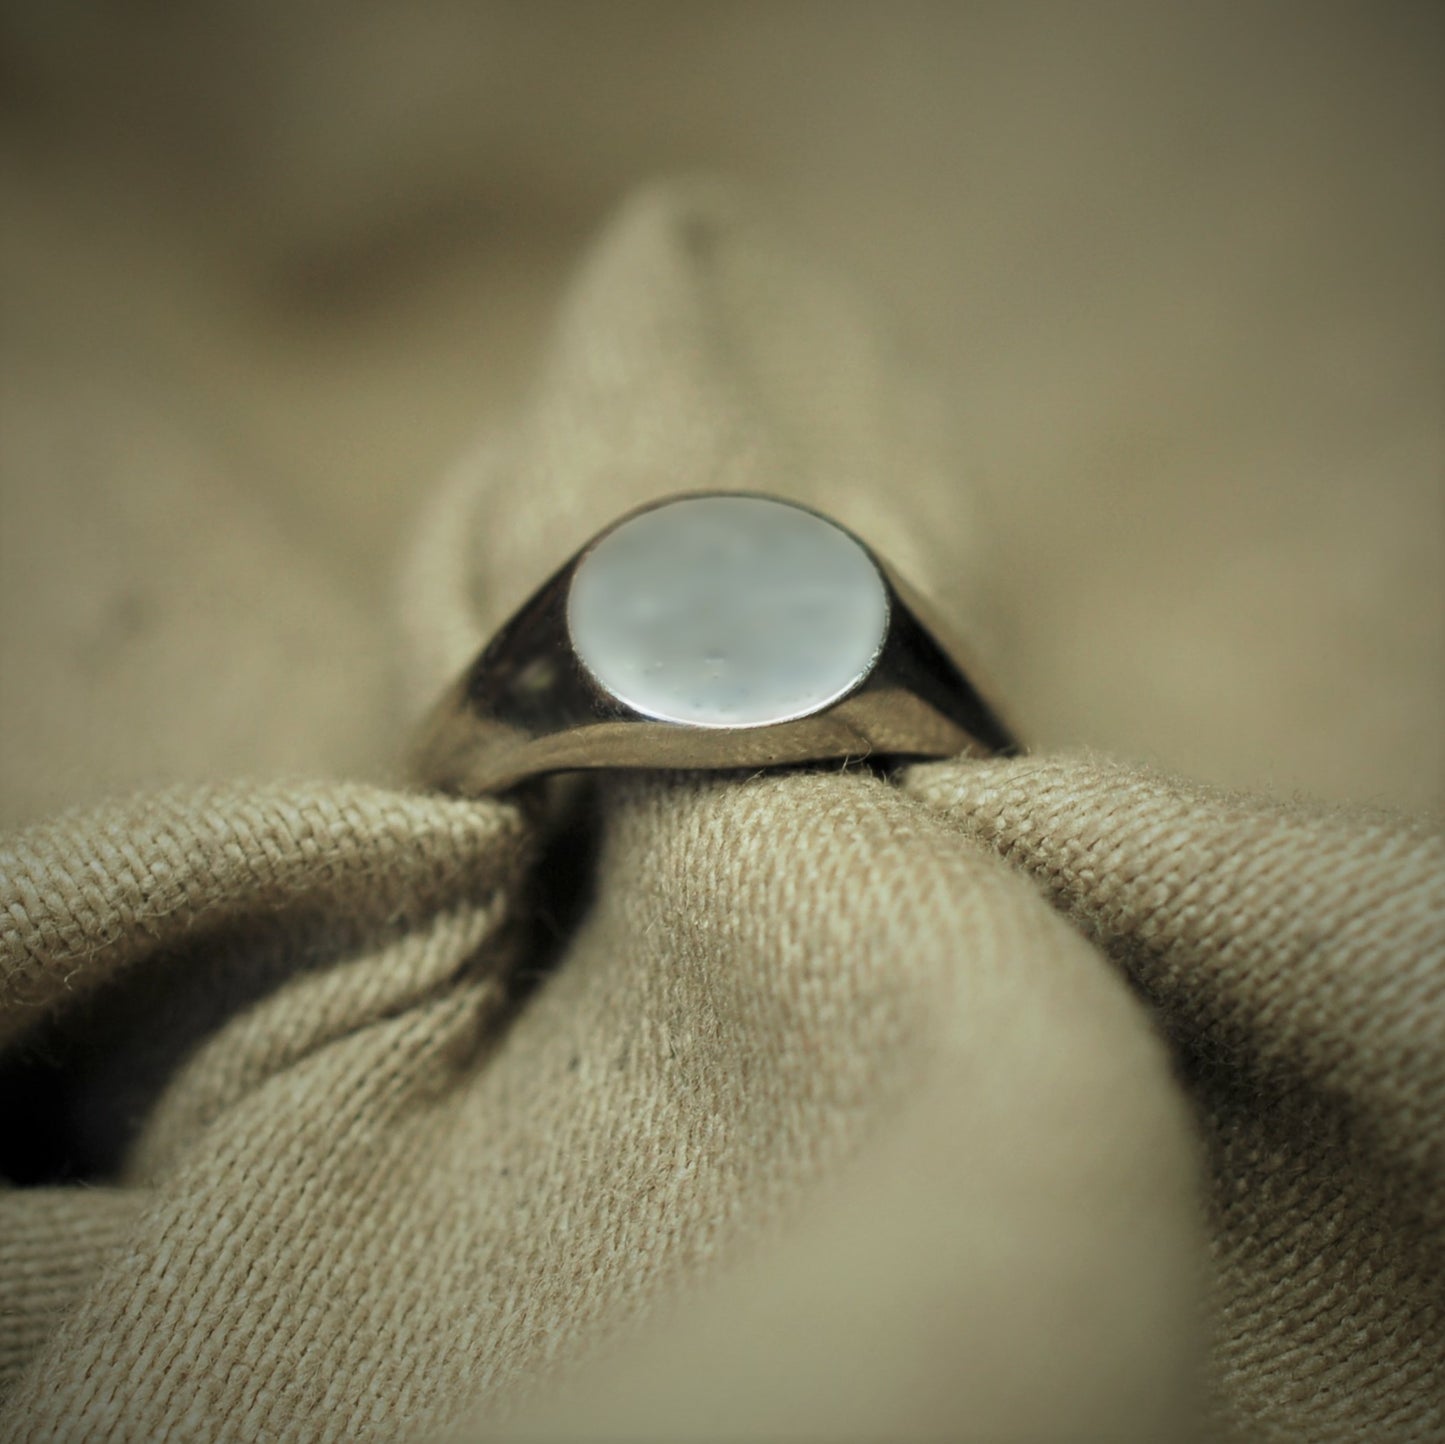 950 Palladium signet ring, suitable for a Lady or young Gentleman. Handmade in England by Adrian Ashley with London Hallmarks. UK size ‘H’, US 4.